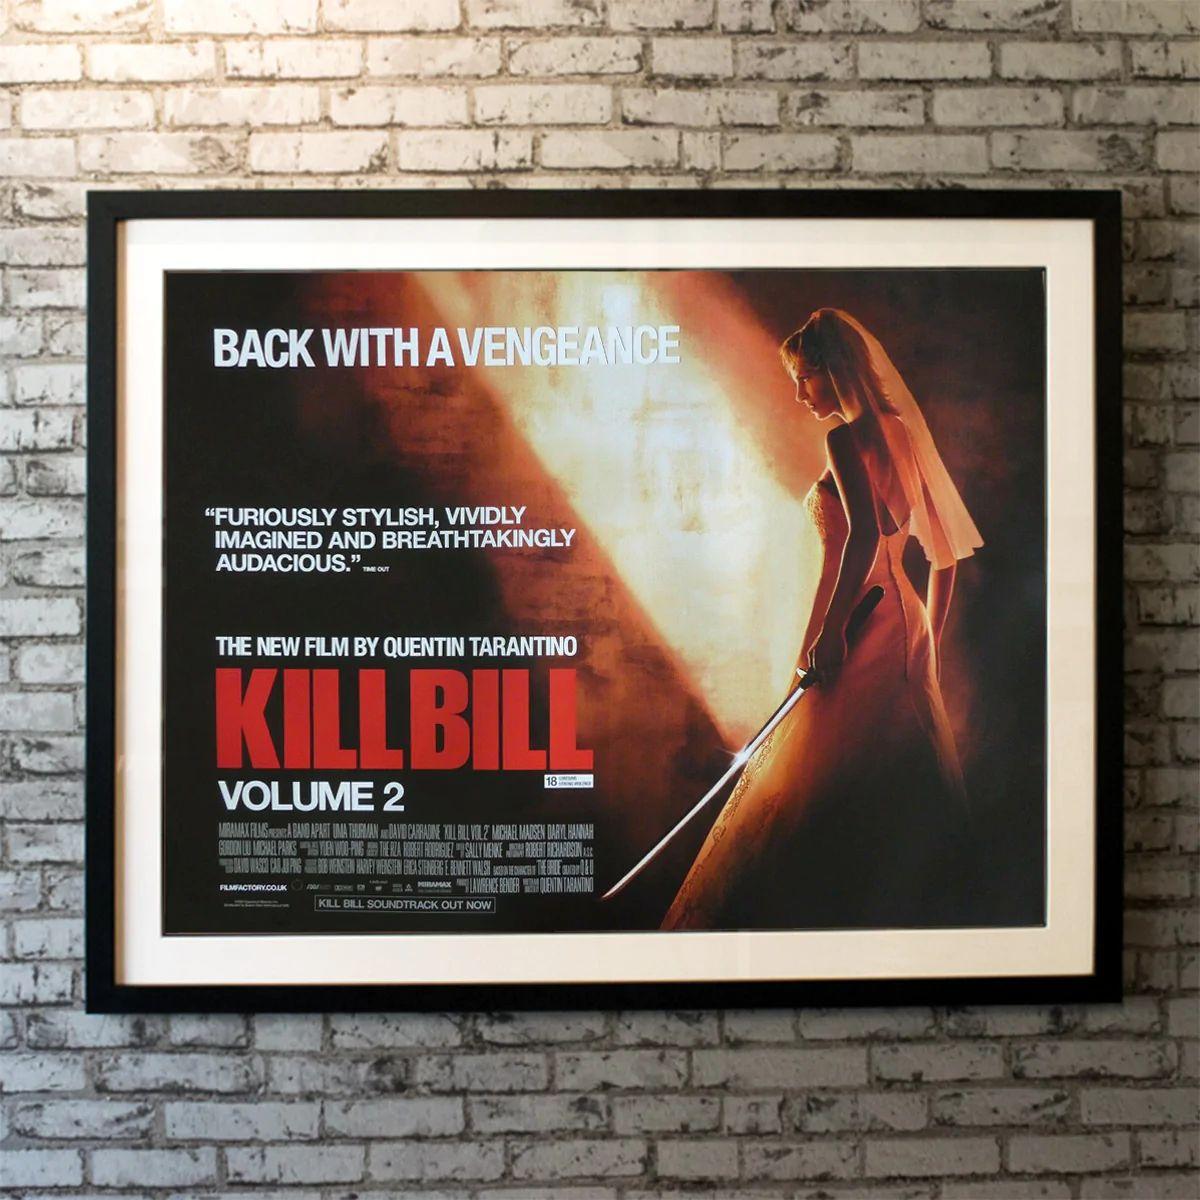 Kill Bill: Volume. 2, Unframed Poster, 2004

The Bride continues her quest of vengeance against her former boss and lover Bill, the reclusive bouncer Budd, and the treacherous, one-eyed Elle.

Year: 2004
Nationality: United Kingdom
Condition: